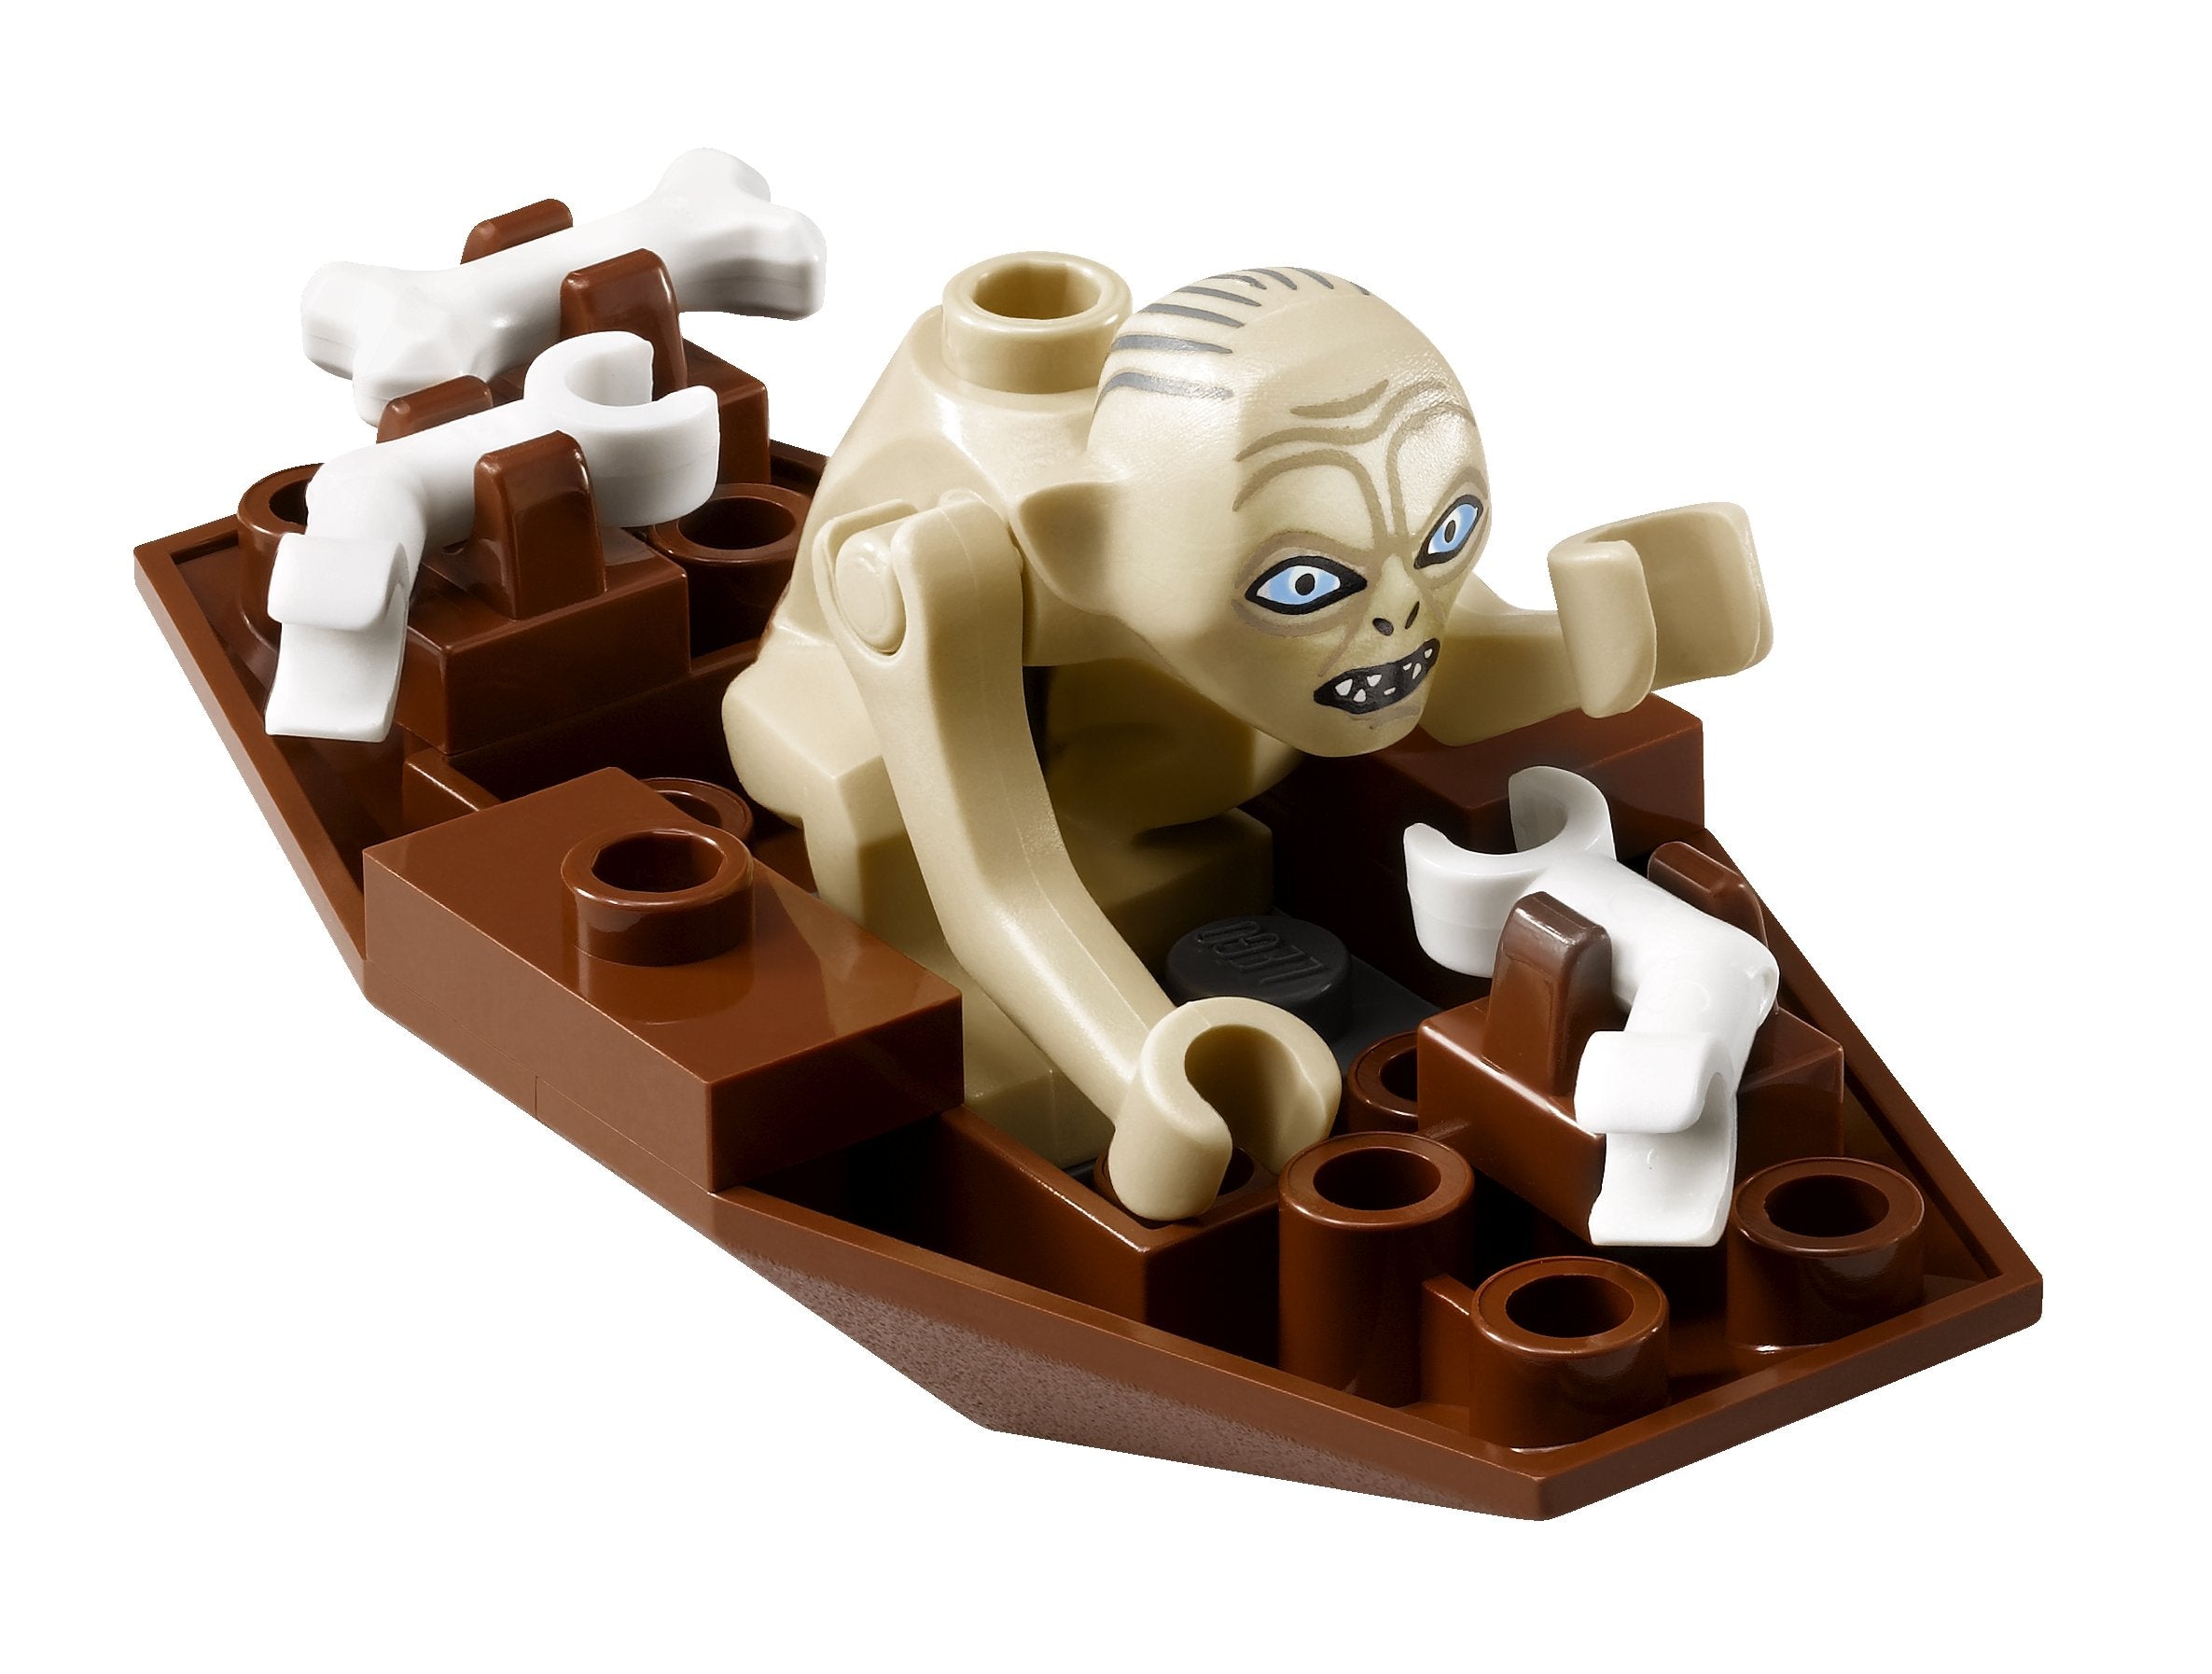 LEGO The Hobbit Riddles for The Ring